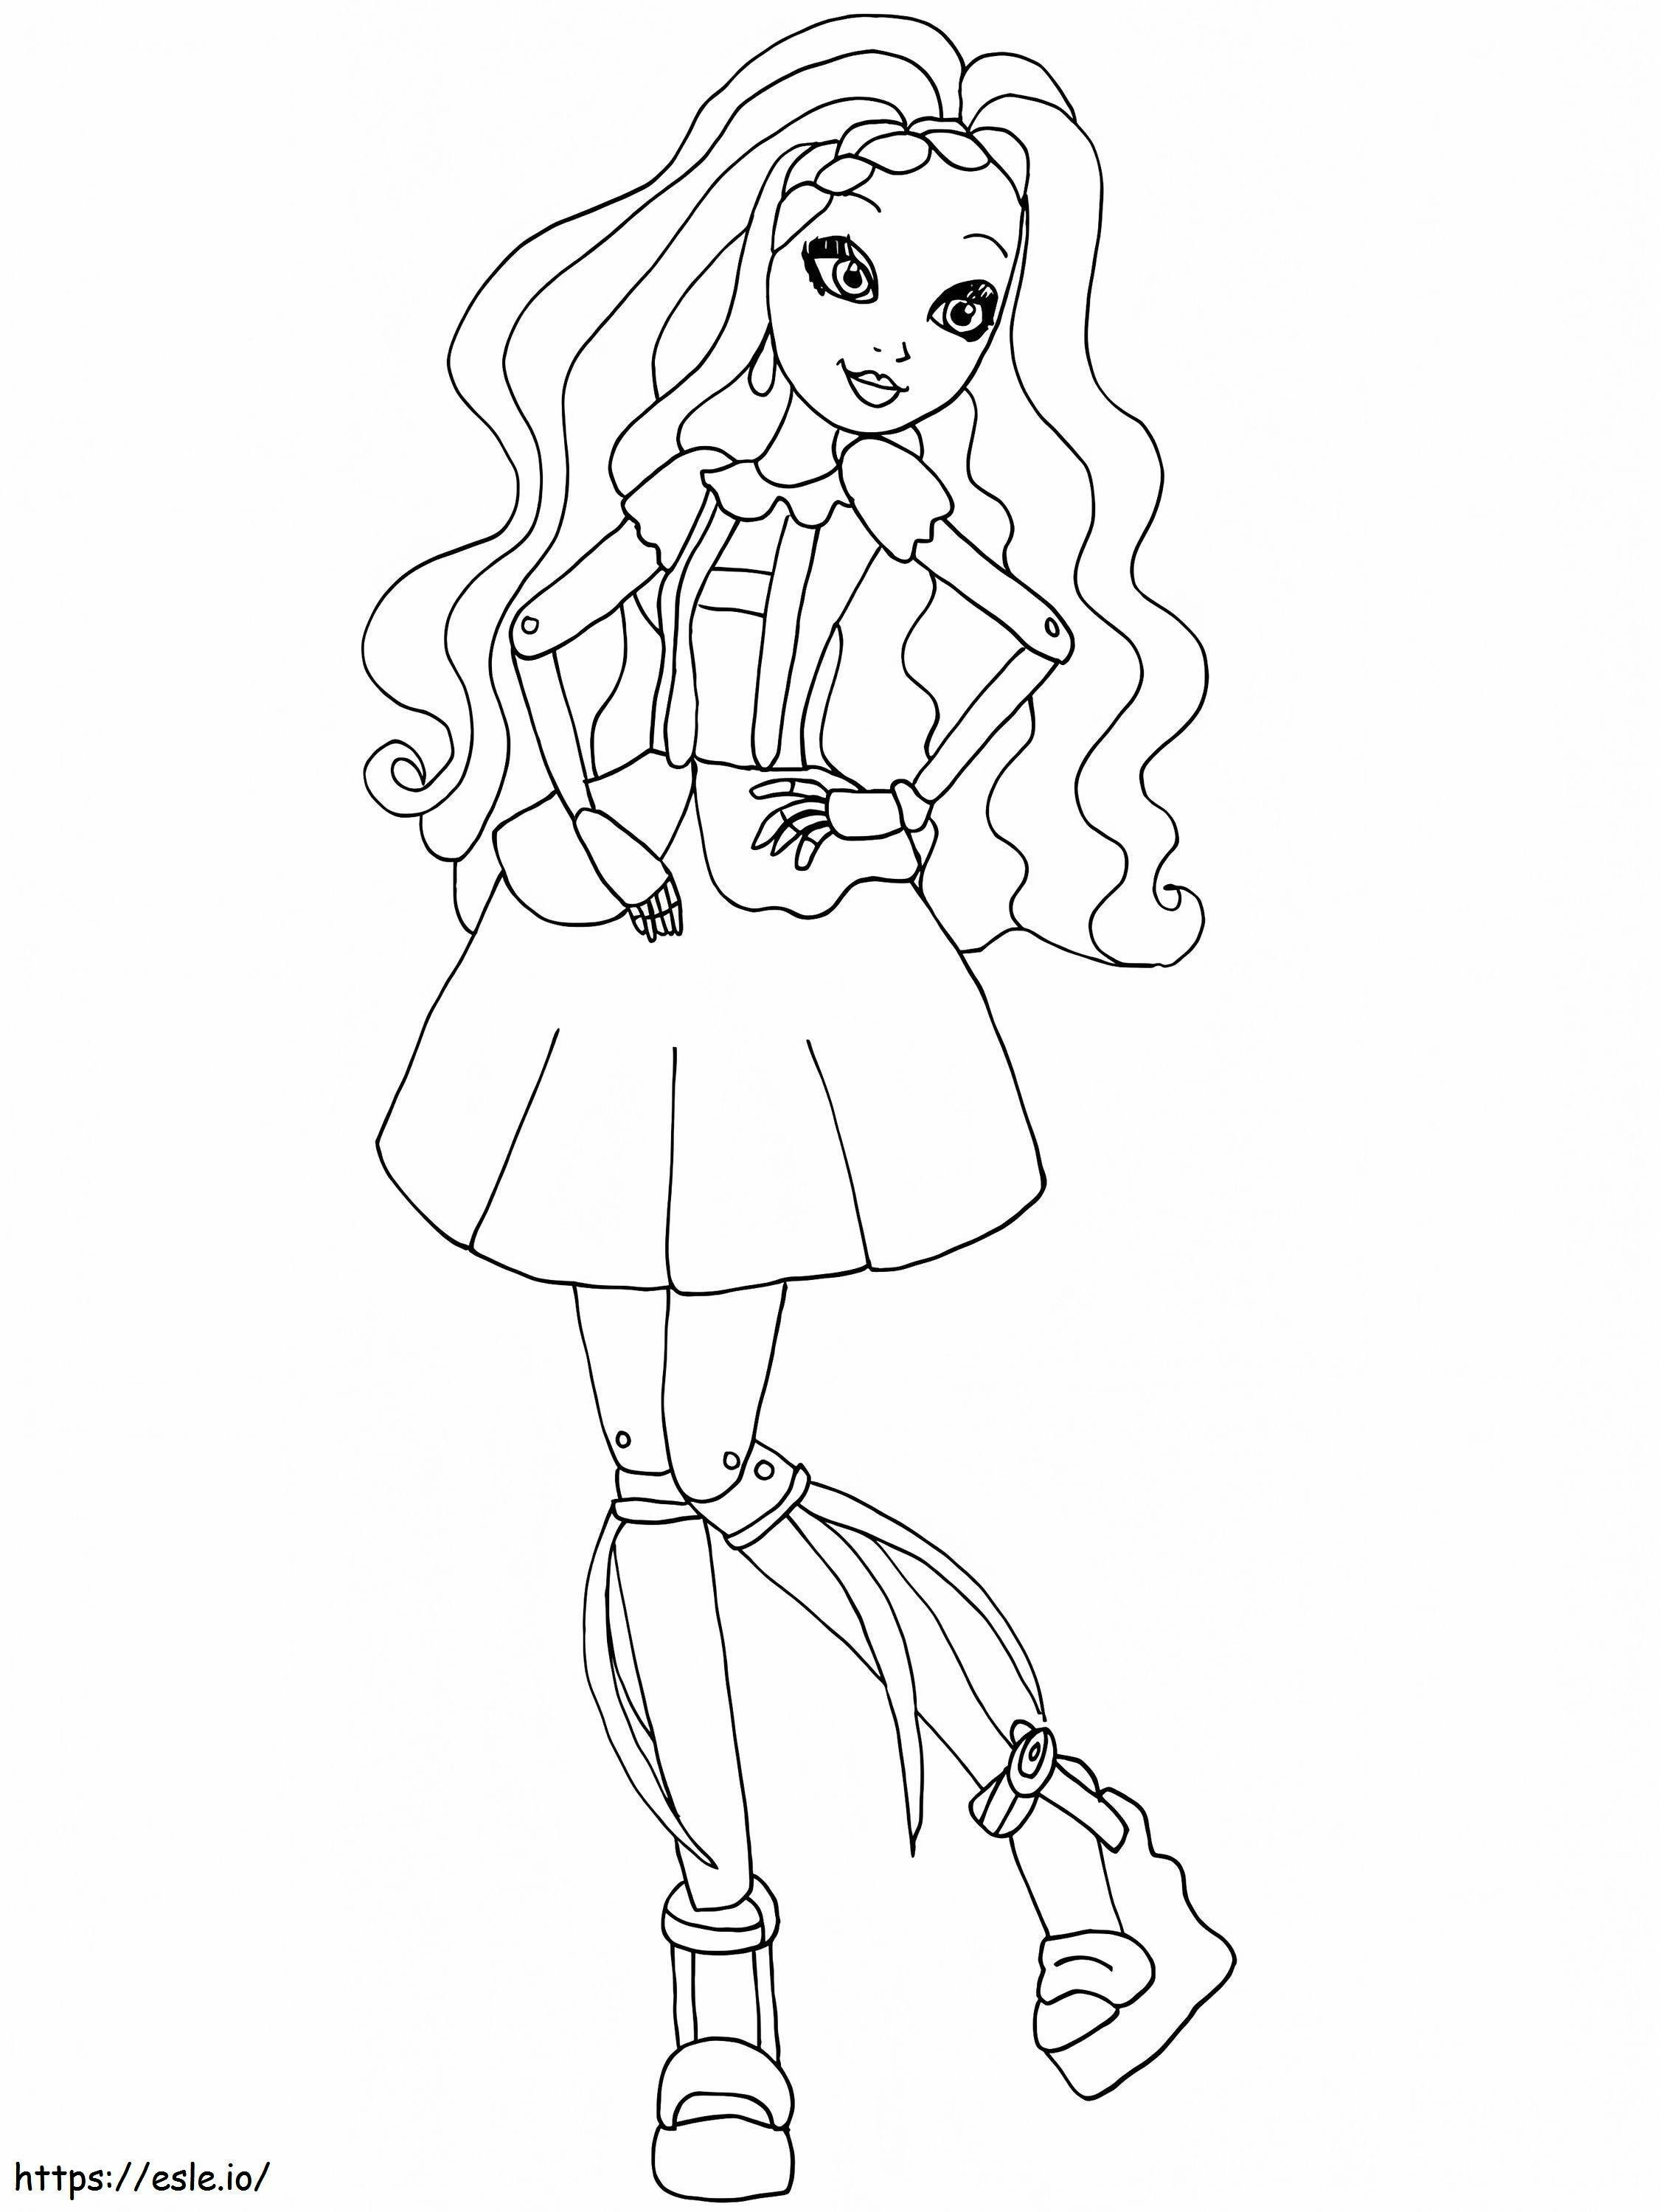 1592528833 Mrtseate coloring page